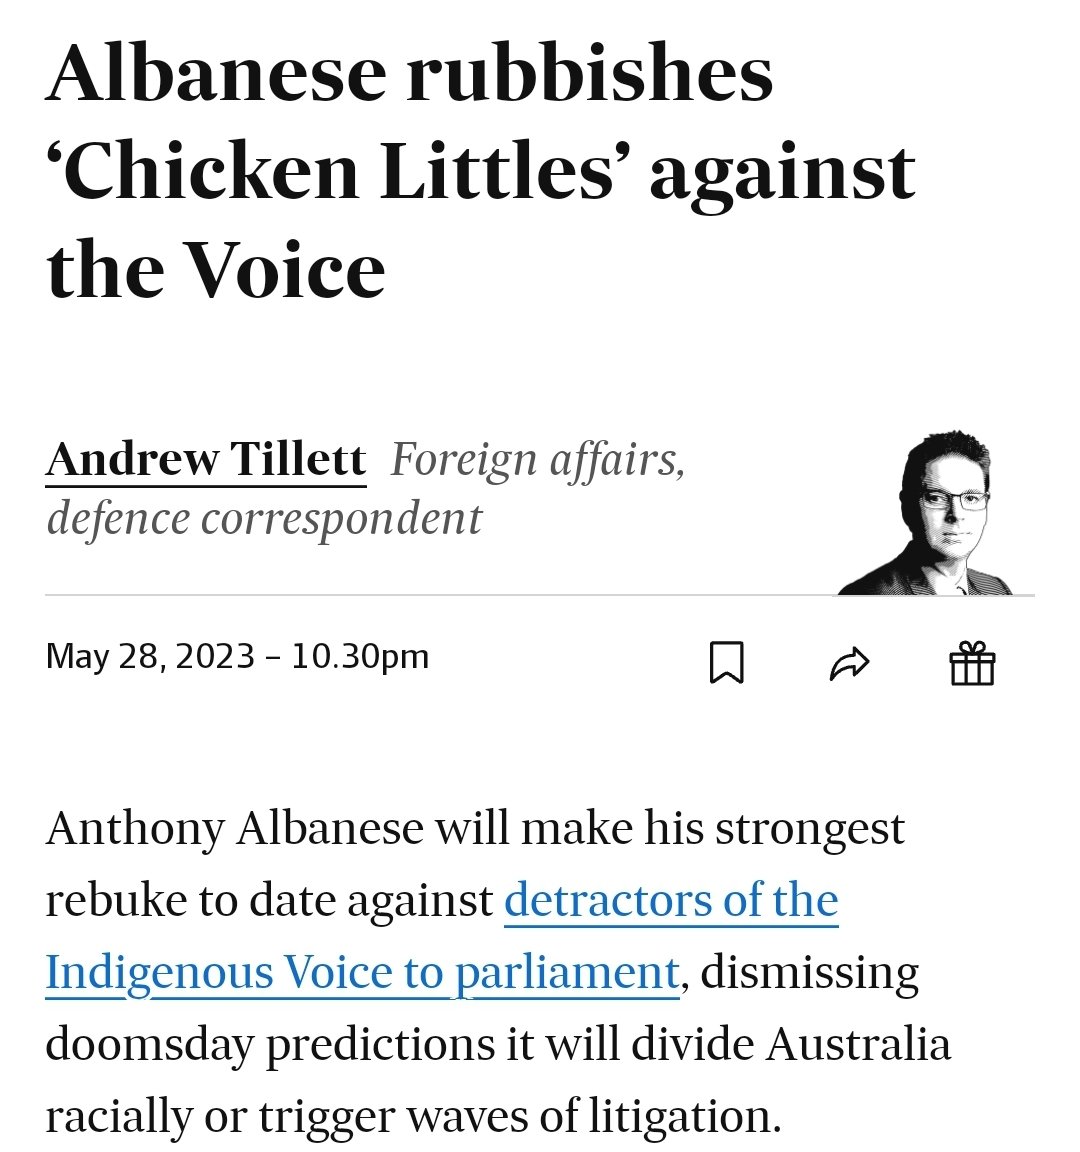 Hi @elonmusk I see the communist here in Australia have ratcheted up the attacks on you and X 'Criminals and Cranks' 😂🥴

Don't worry, Anthony Albanese called 60% of Australians cookers and chicken littles when he was asking us to divide our nation on the premise of race....…